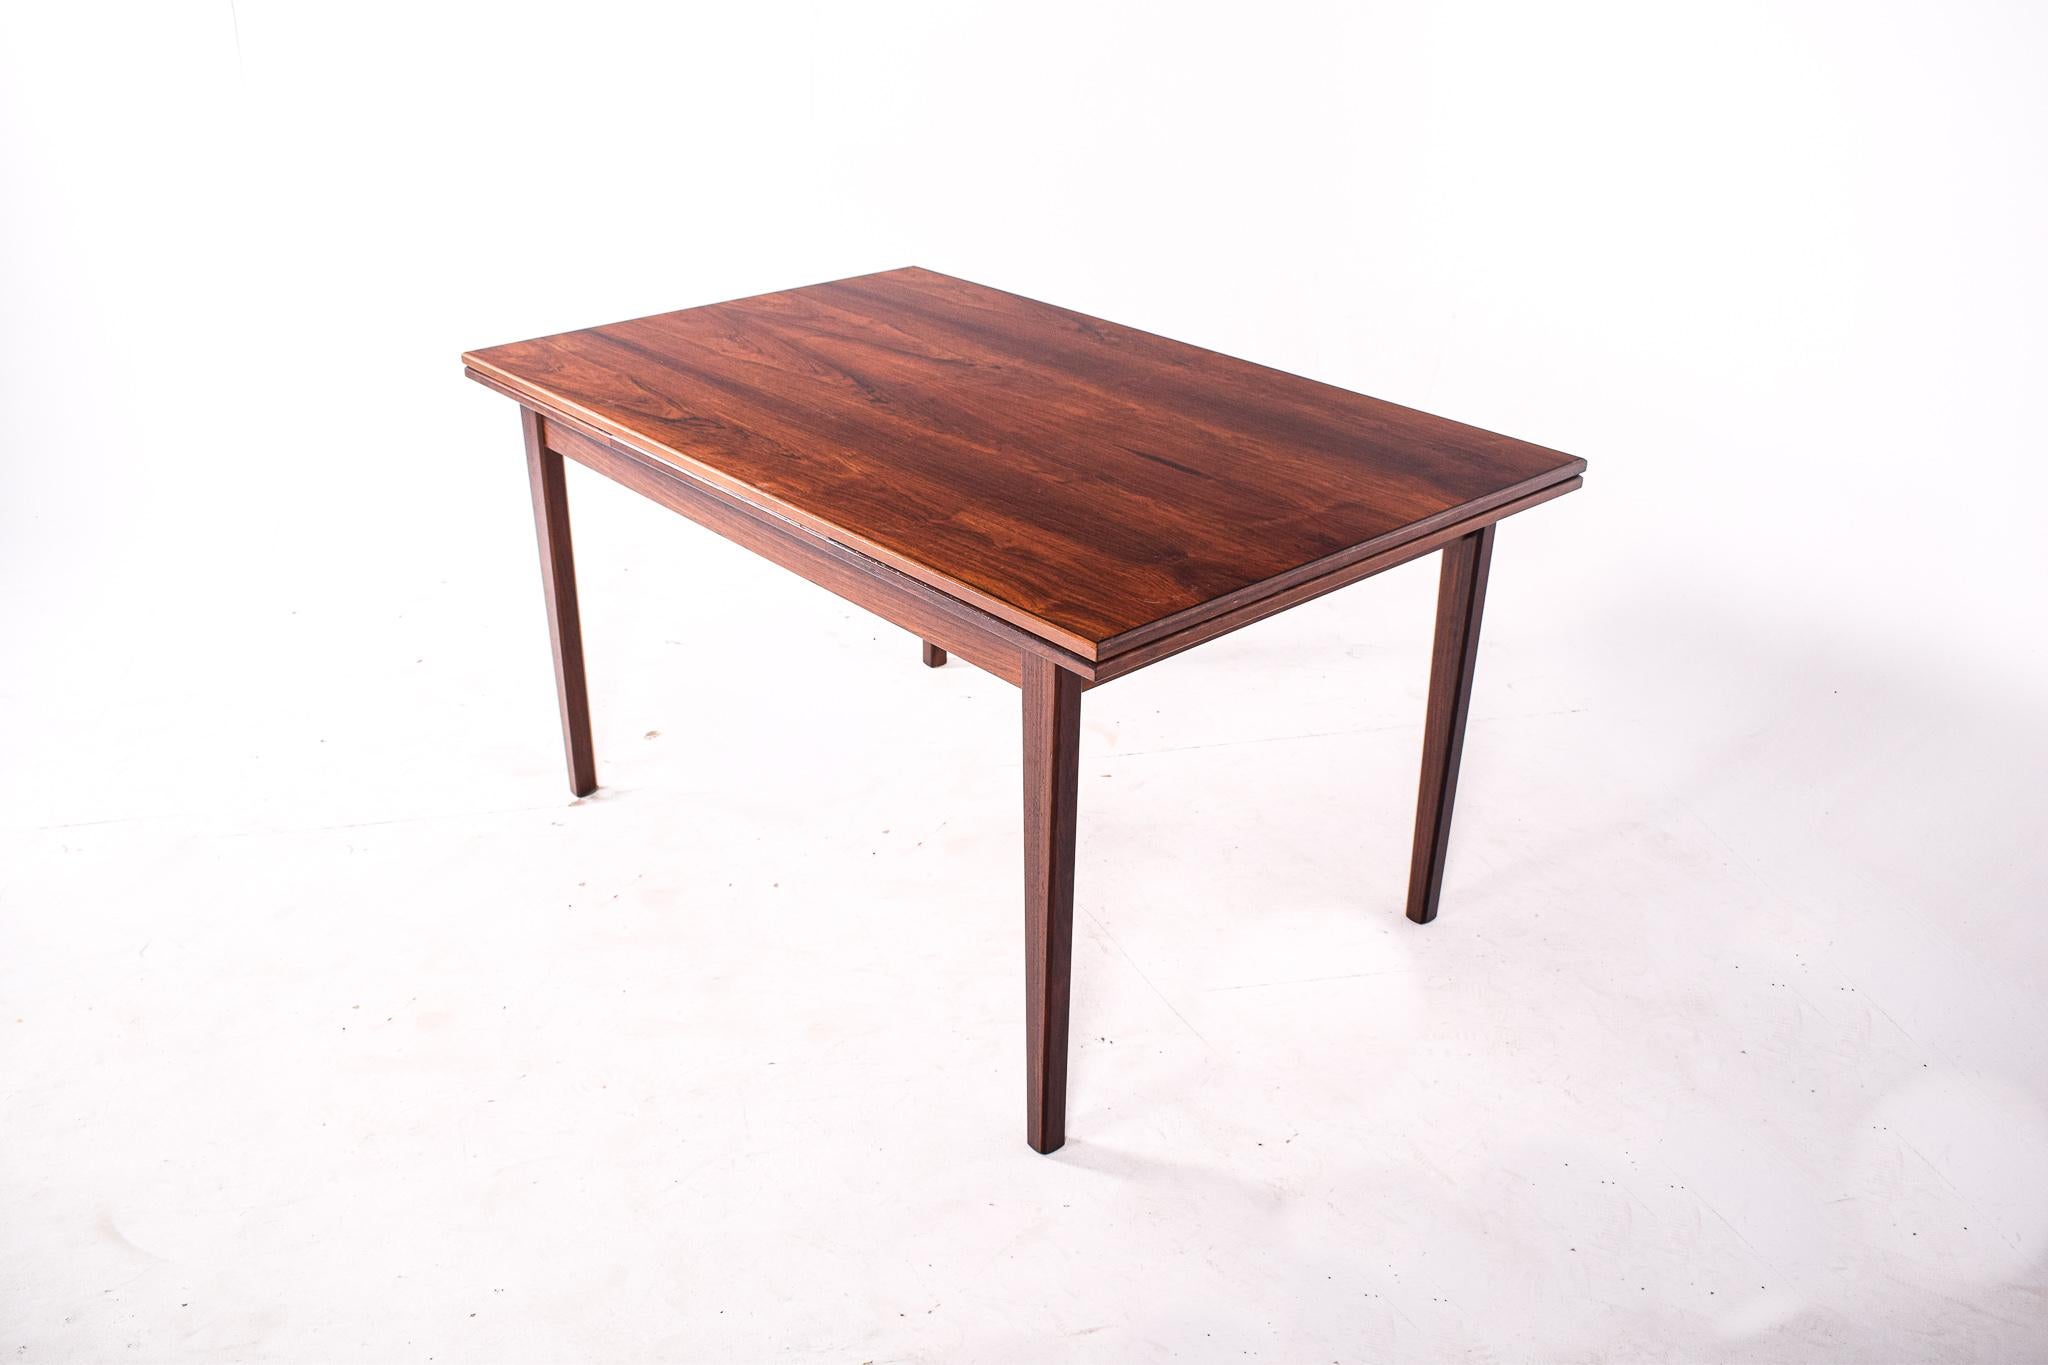 A beautiful rosewood midcentury Danish dining table, manufactured in the Denmark the 1960s. Length of each extension: 45 cm.